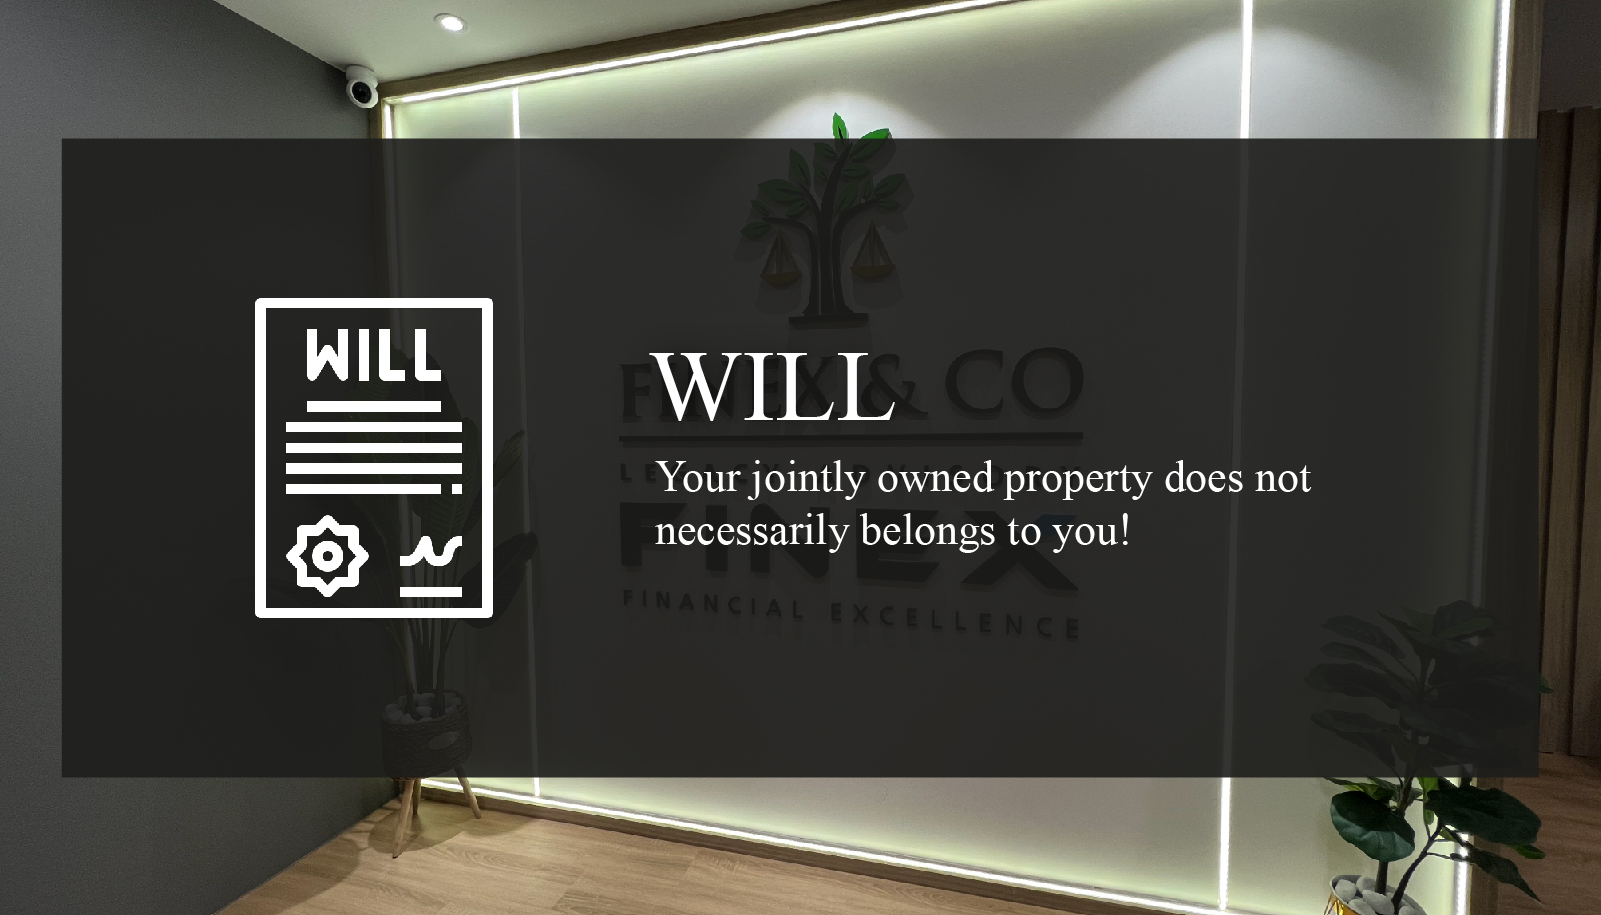 Your jointly owned property does not necessarily belongs to you!